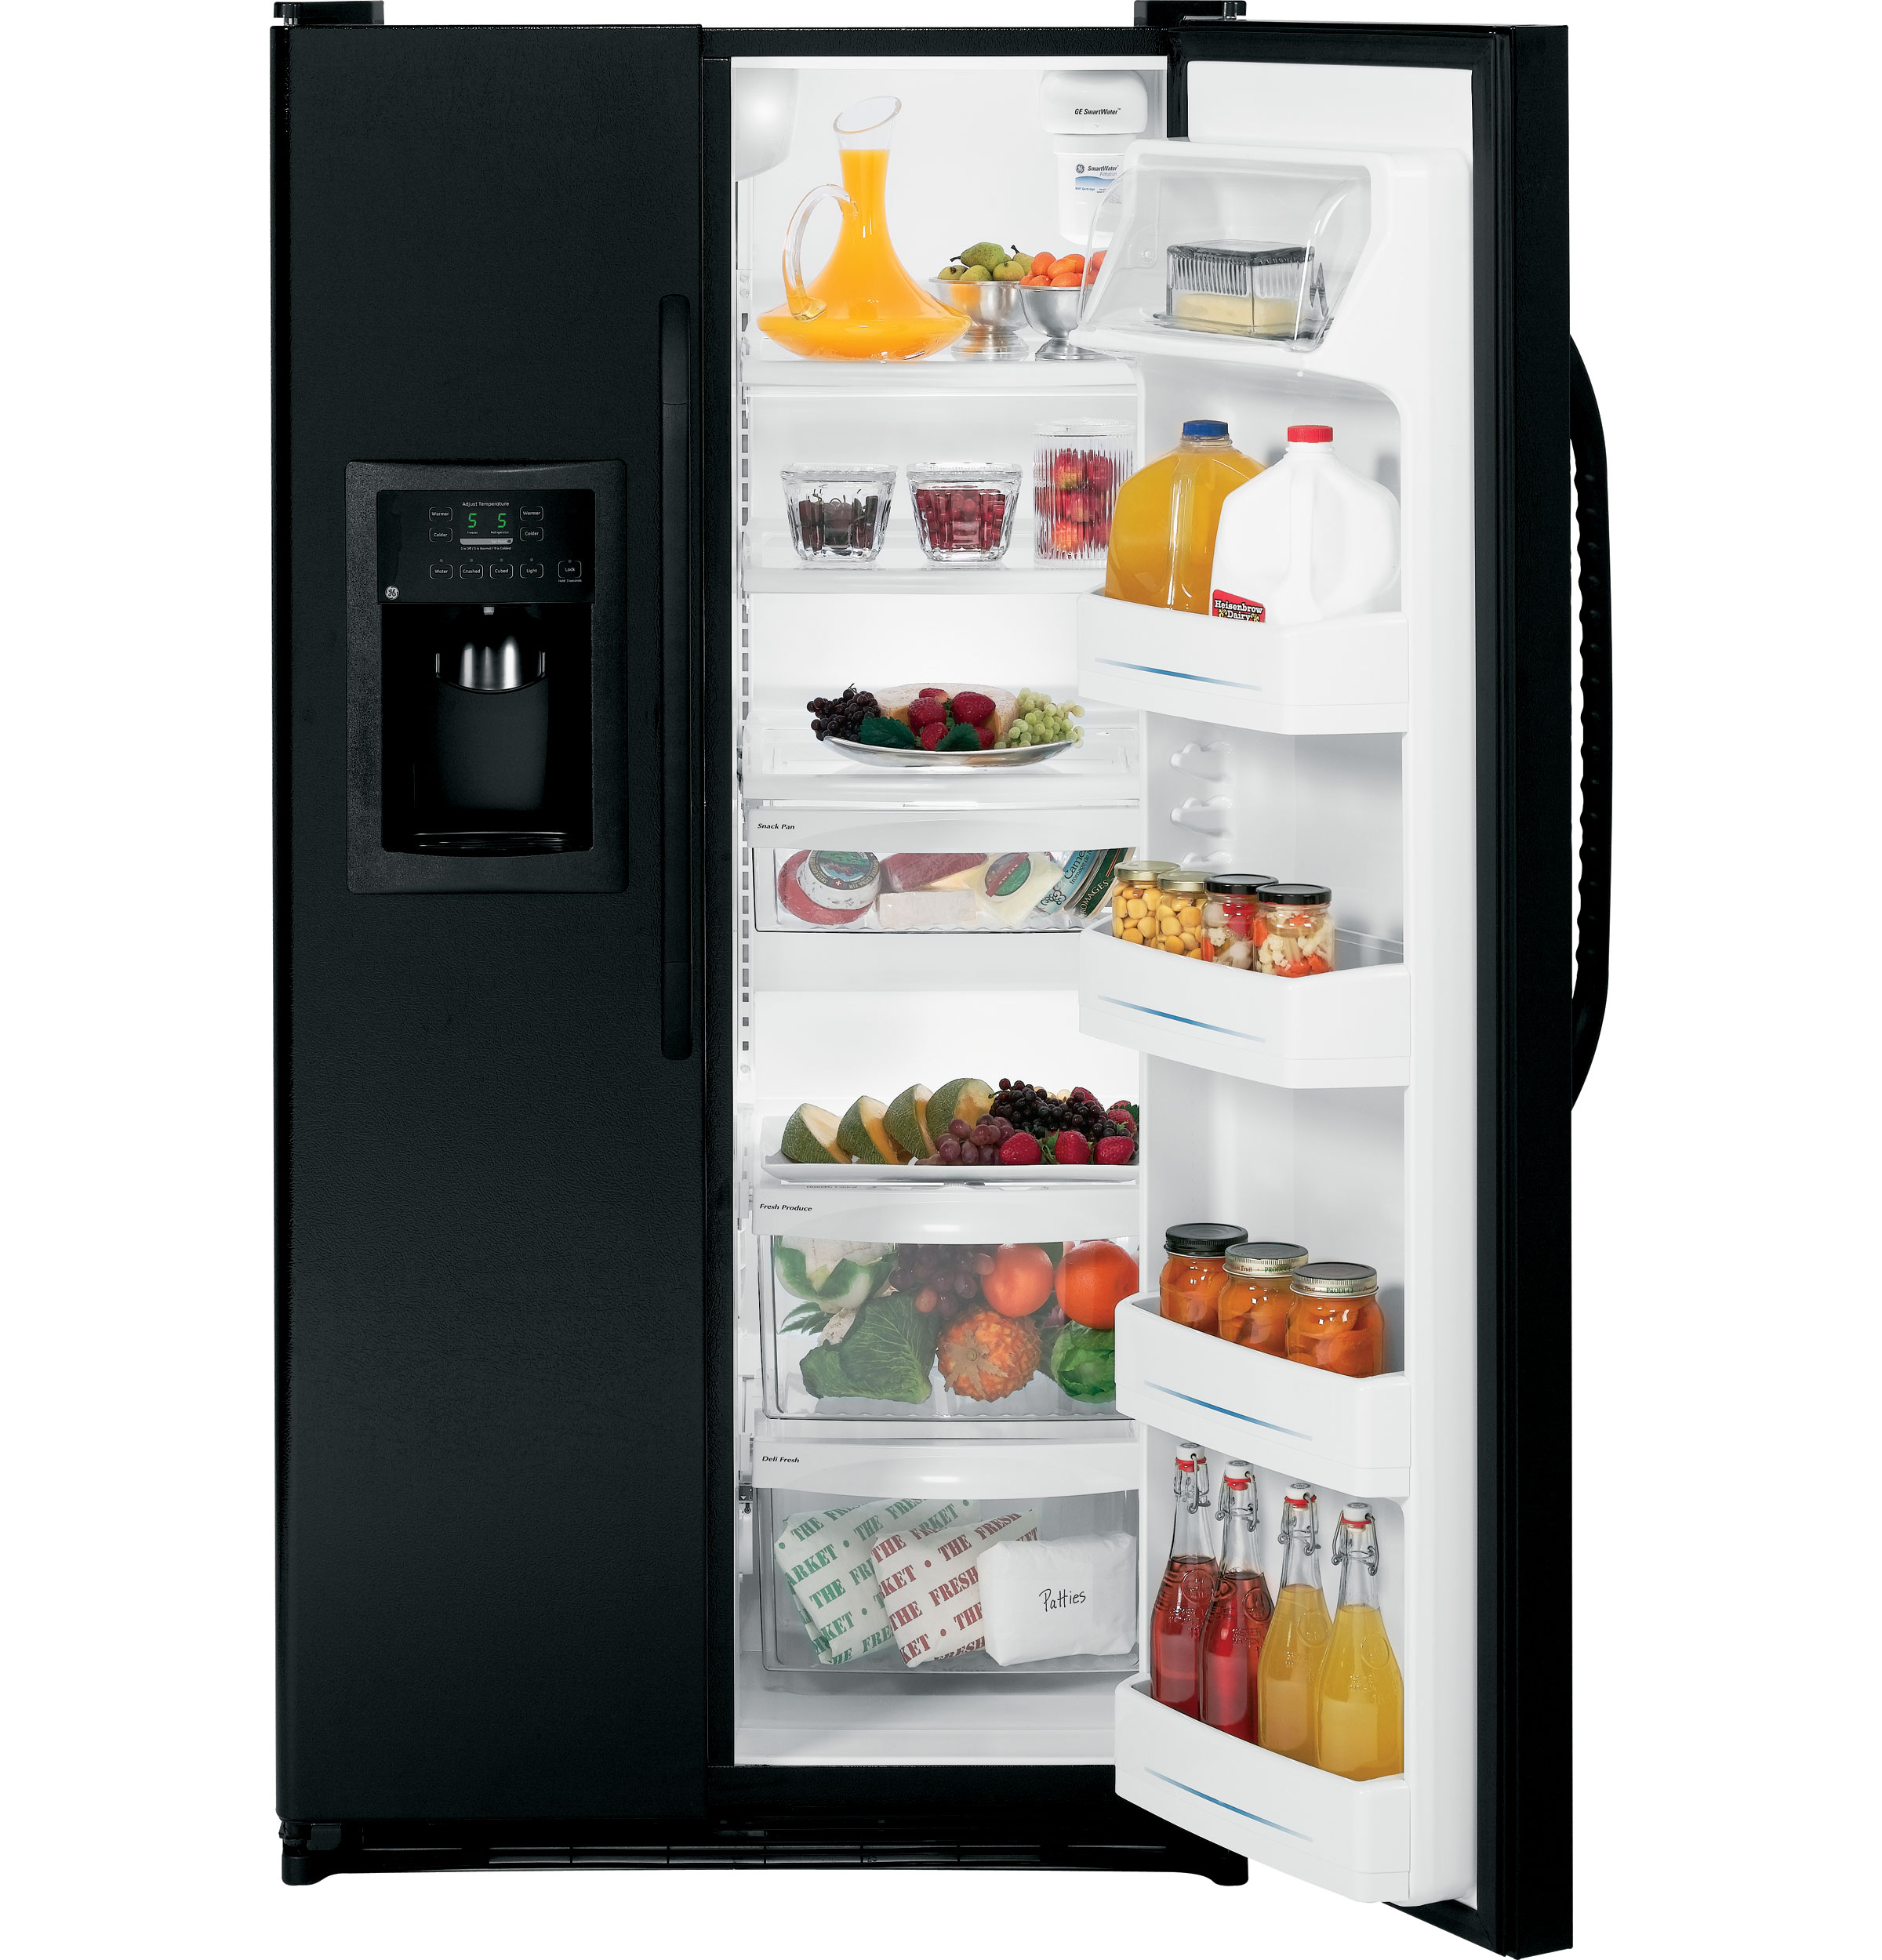 GE® ENERGY STAR® 25.3 Cu. Ft. Side-By-Side Refrigerator with Dispenser